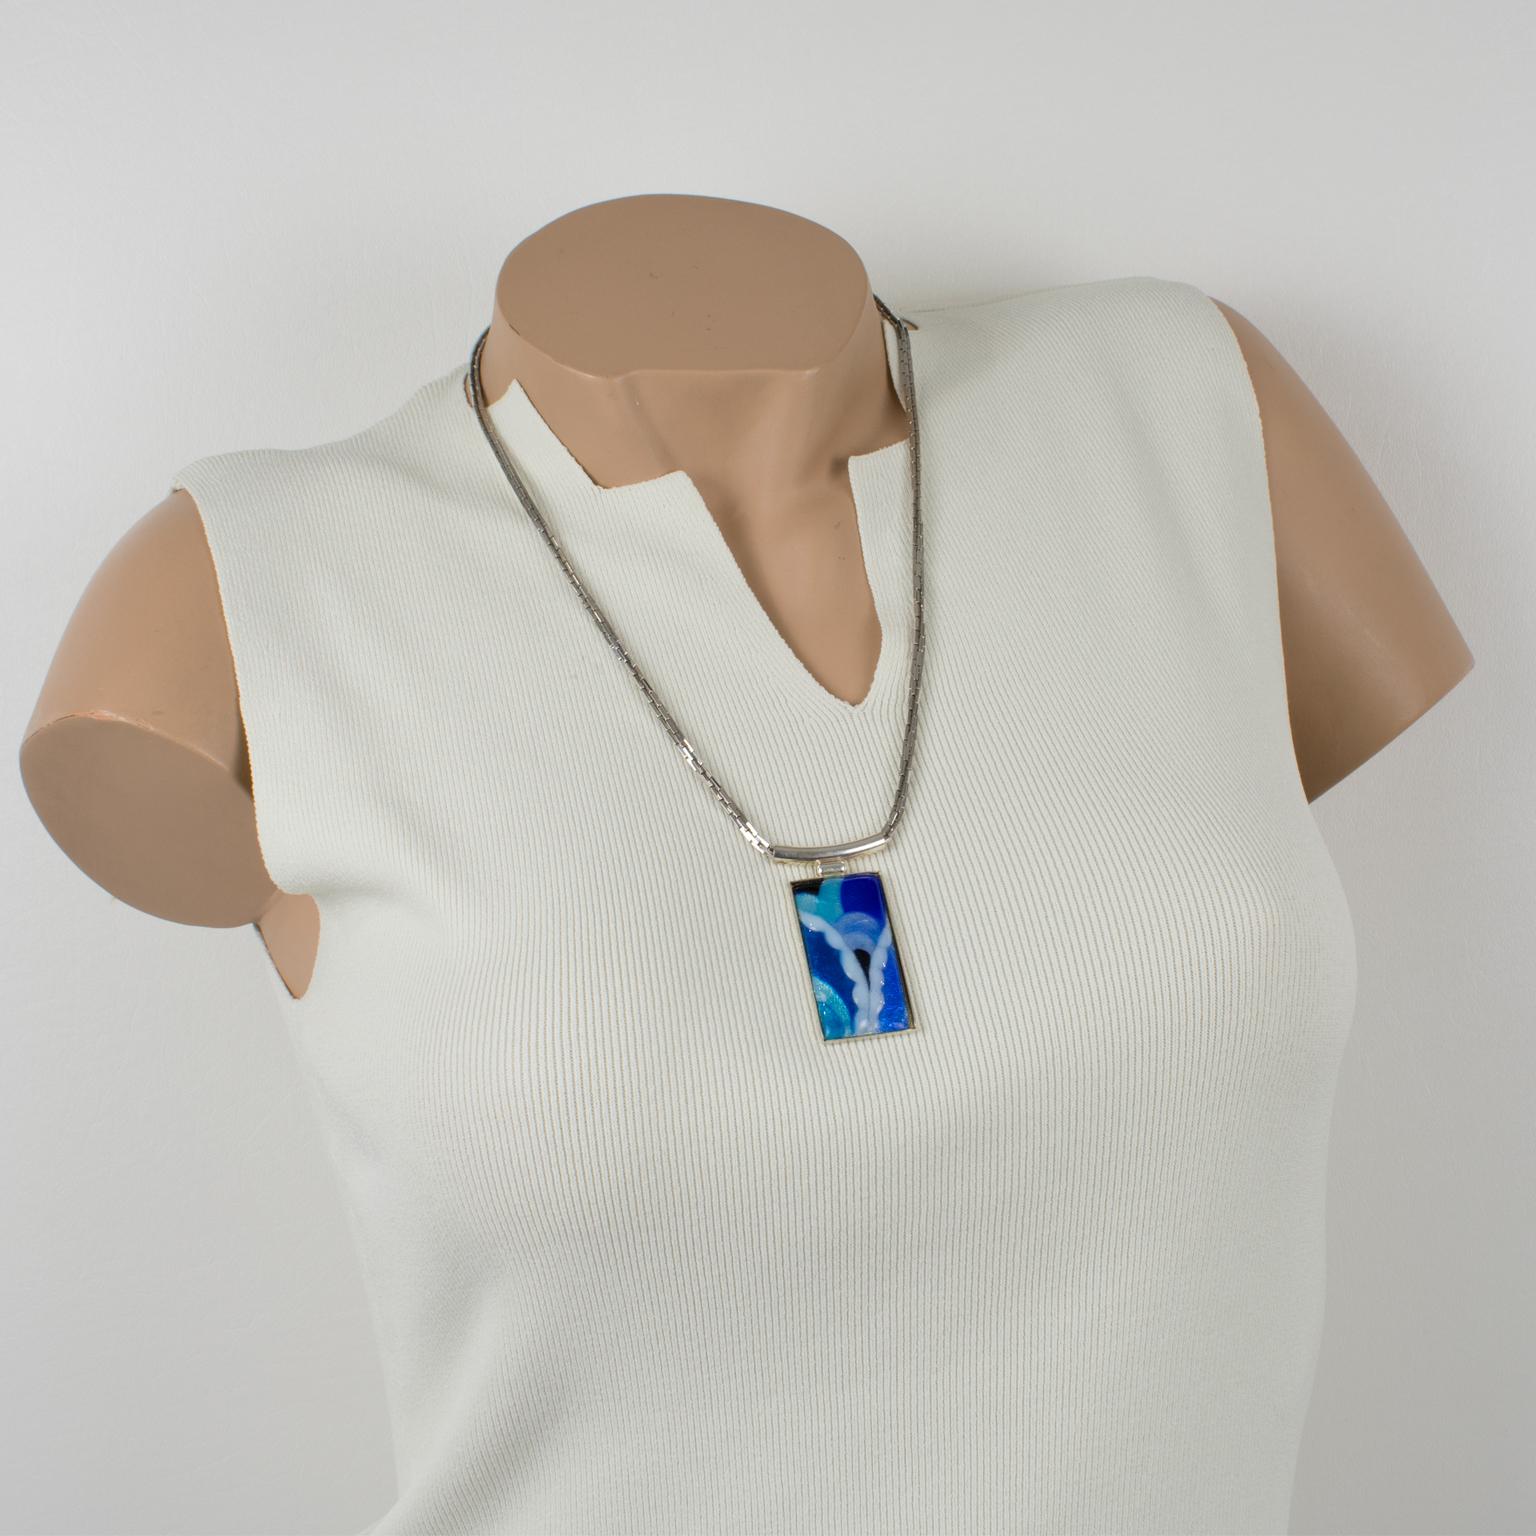 This stunning pendant necklace was hand-crafted by Limoges enamelist artist Mauricette Pinoteau. The rectangular silver plate frame is ornate with an enamel-on-copper cameo. The Art-Deco-inspired design has a geometric shape. The pendant boasts